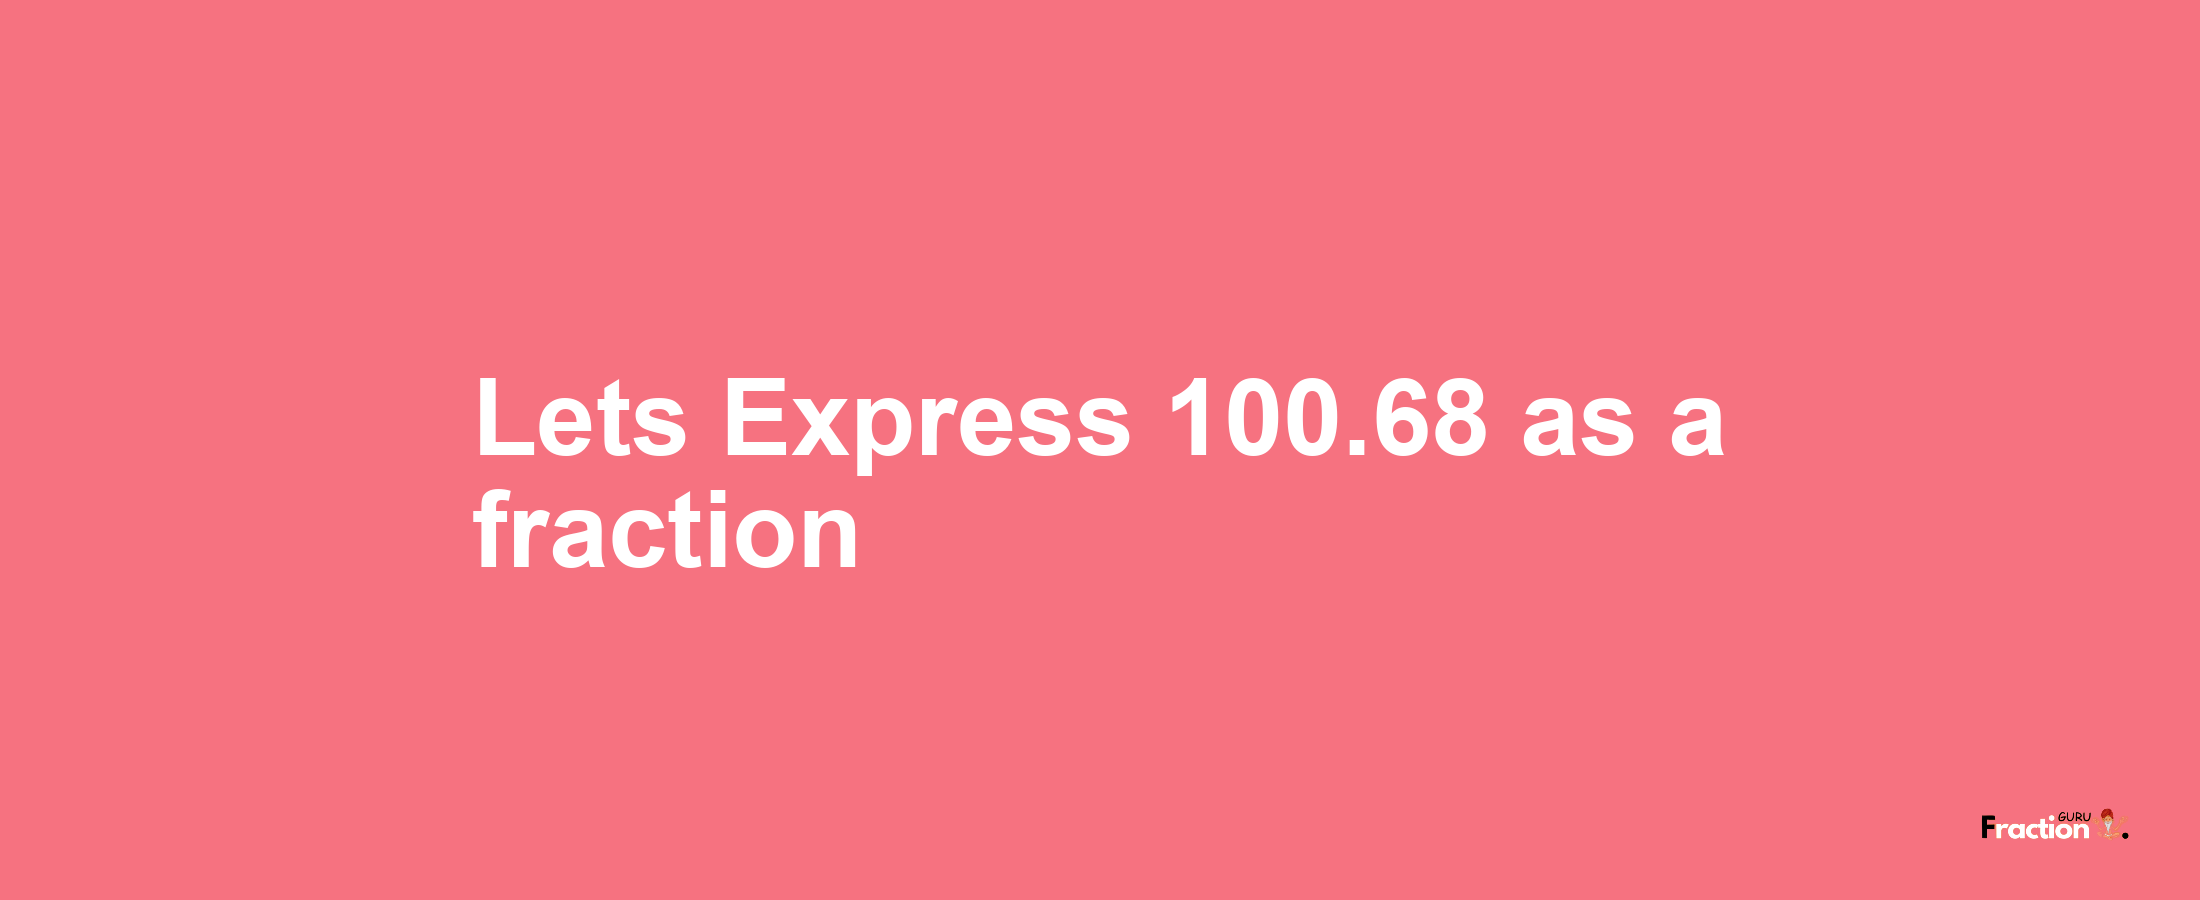 Lets Express 100.68 as afraction